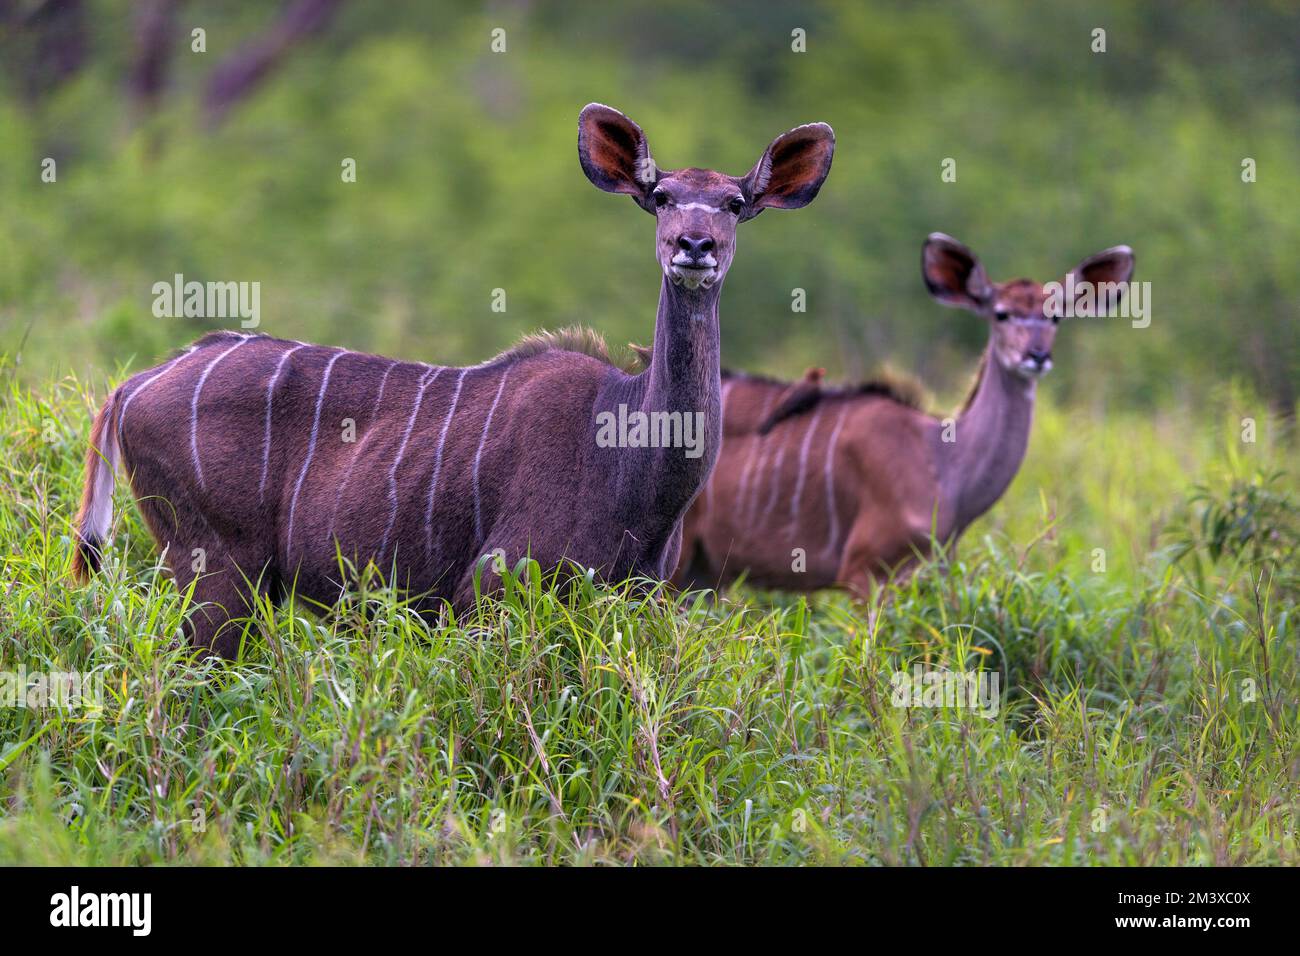 Two females greater kudu (Tragelaphus strepsiceros) in Zimanga Private Reserve, South Africa. Stock Photo